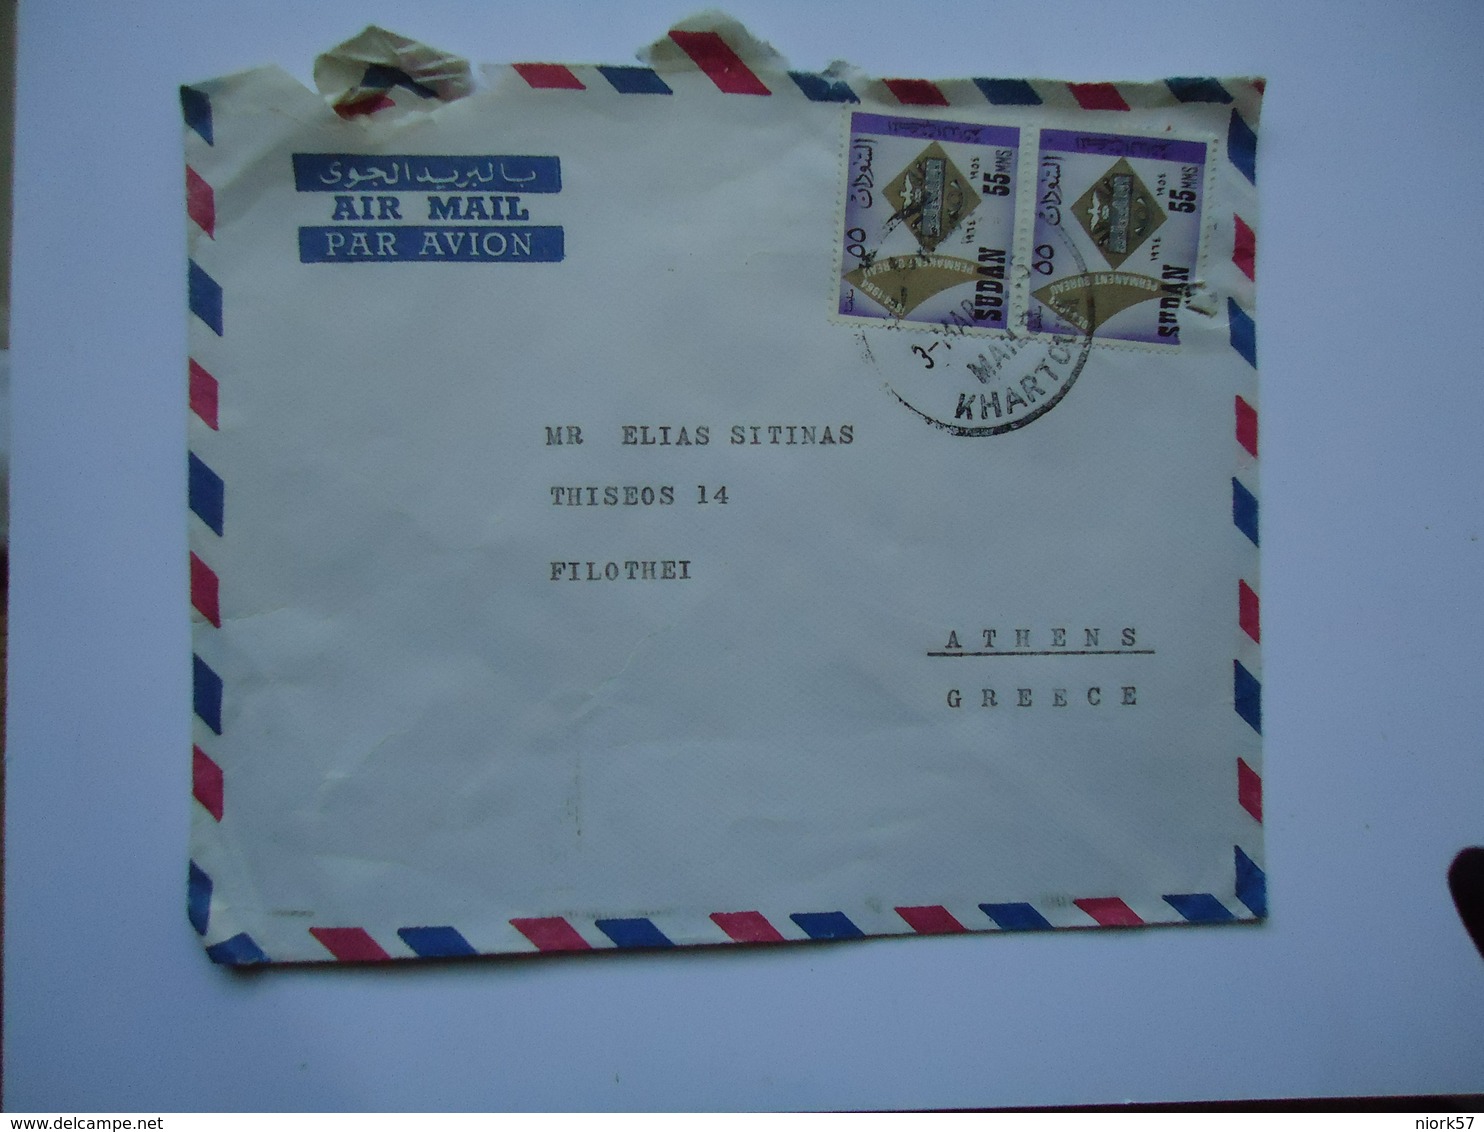 GREECE SUDAN  COVER  1965  WITH POSTMARK POSTED  GREECE ATHENS XALADRION - Flammes & Oblitérations